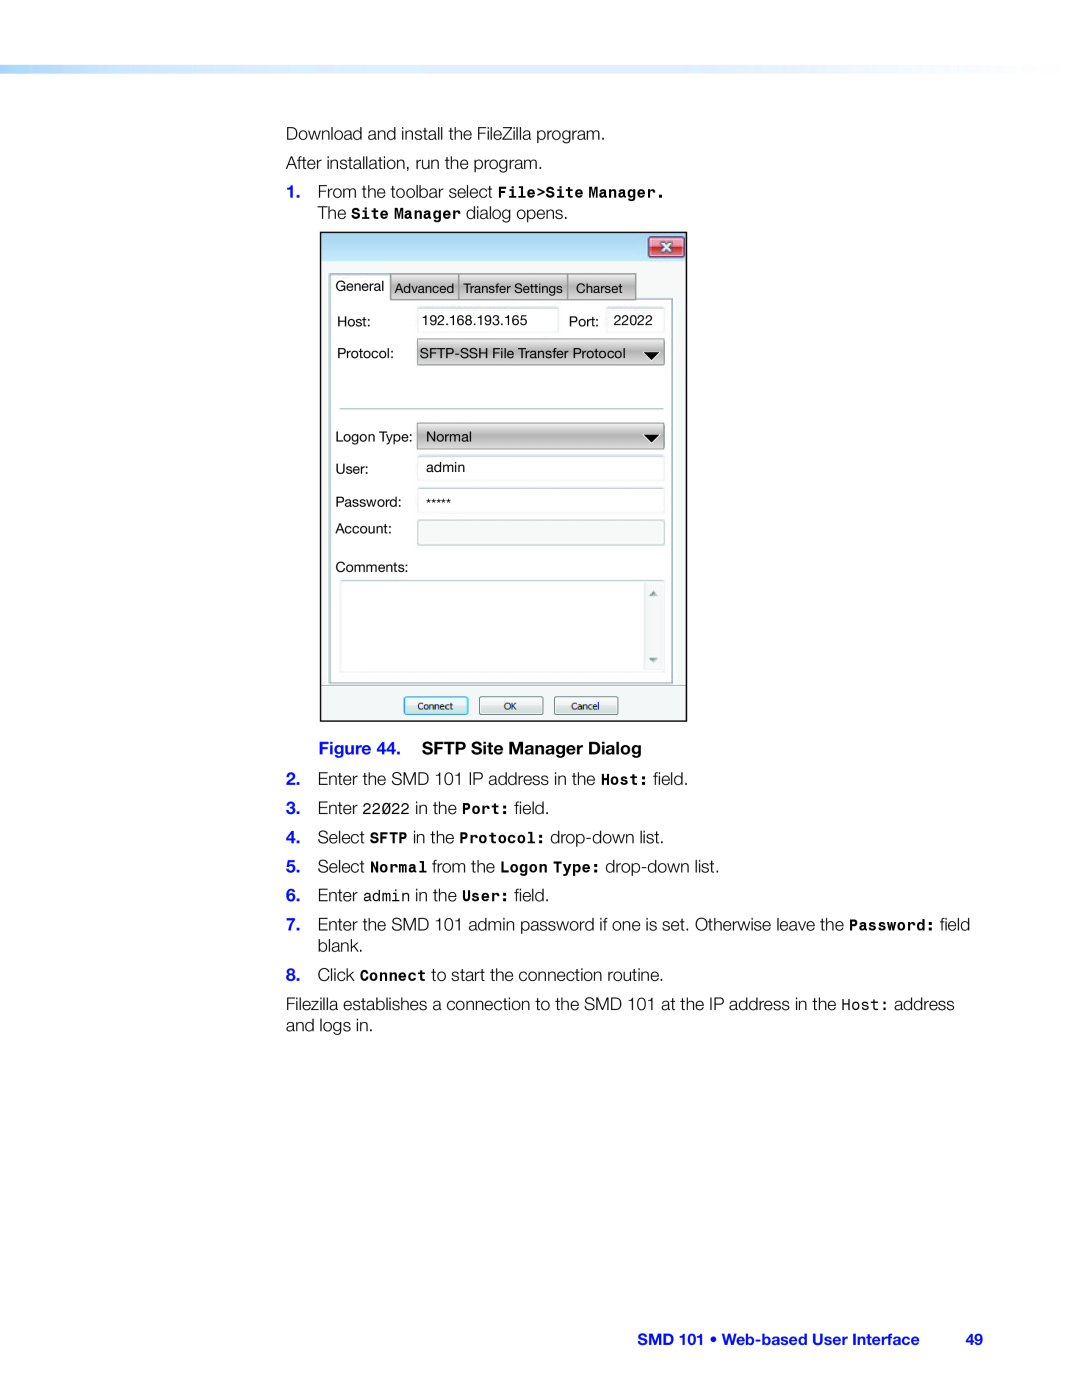 Extron electronic SMD 101 manual SFTP Site Manager Dialog 